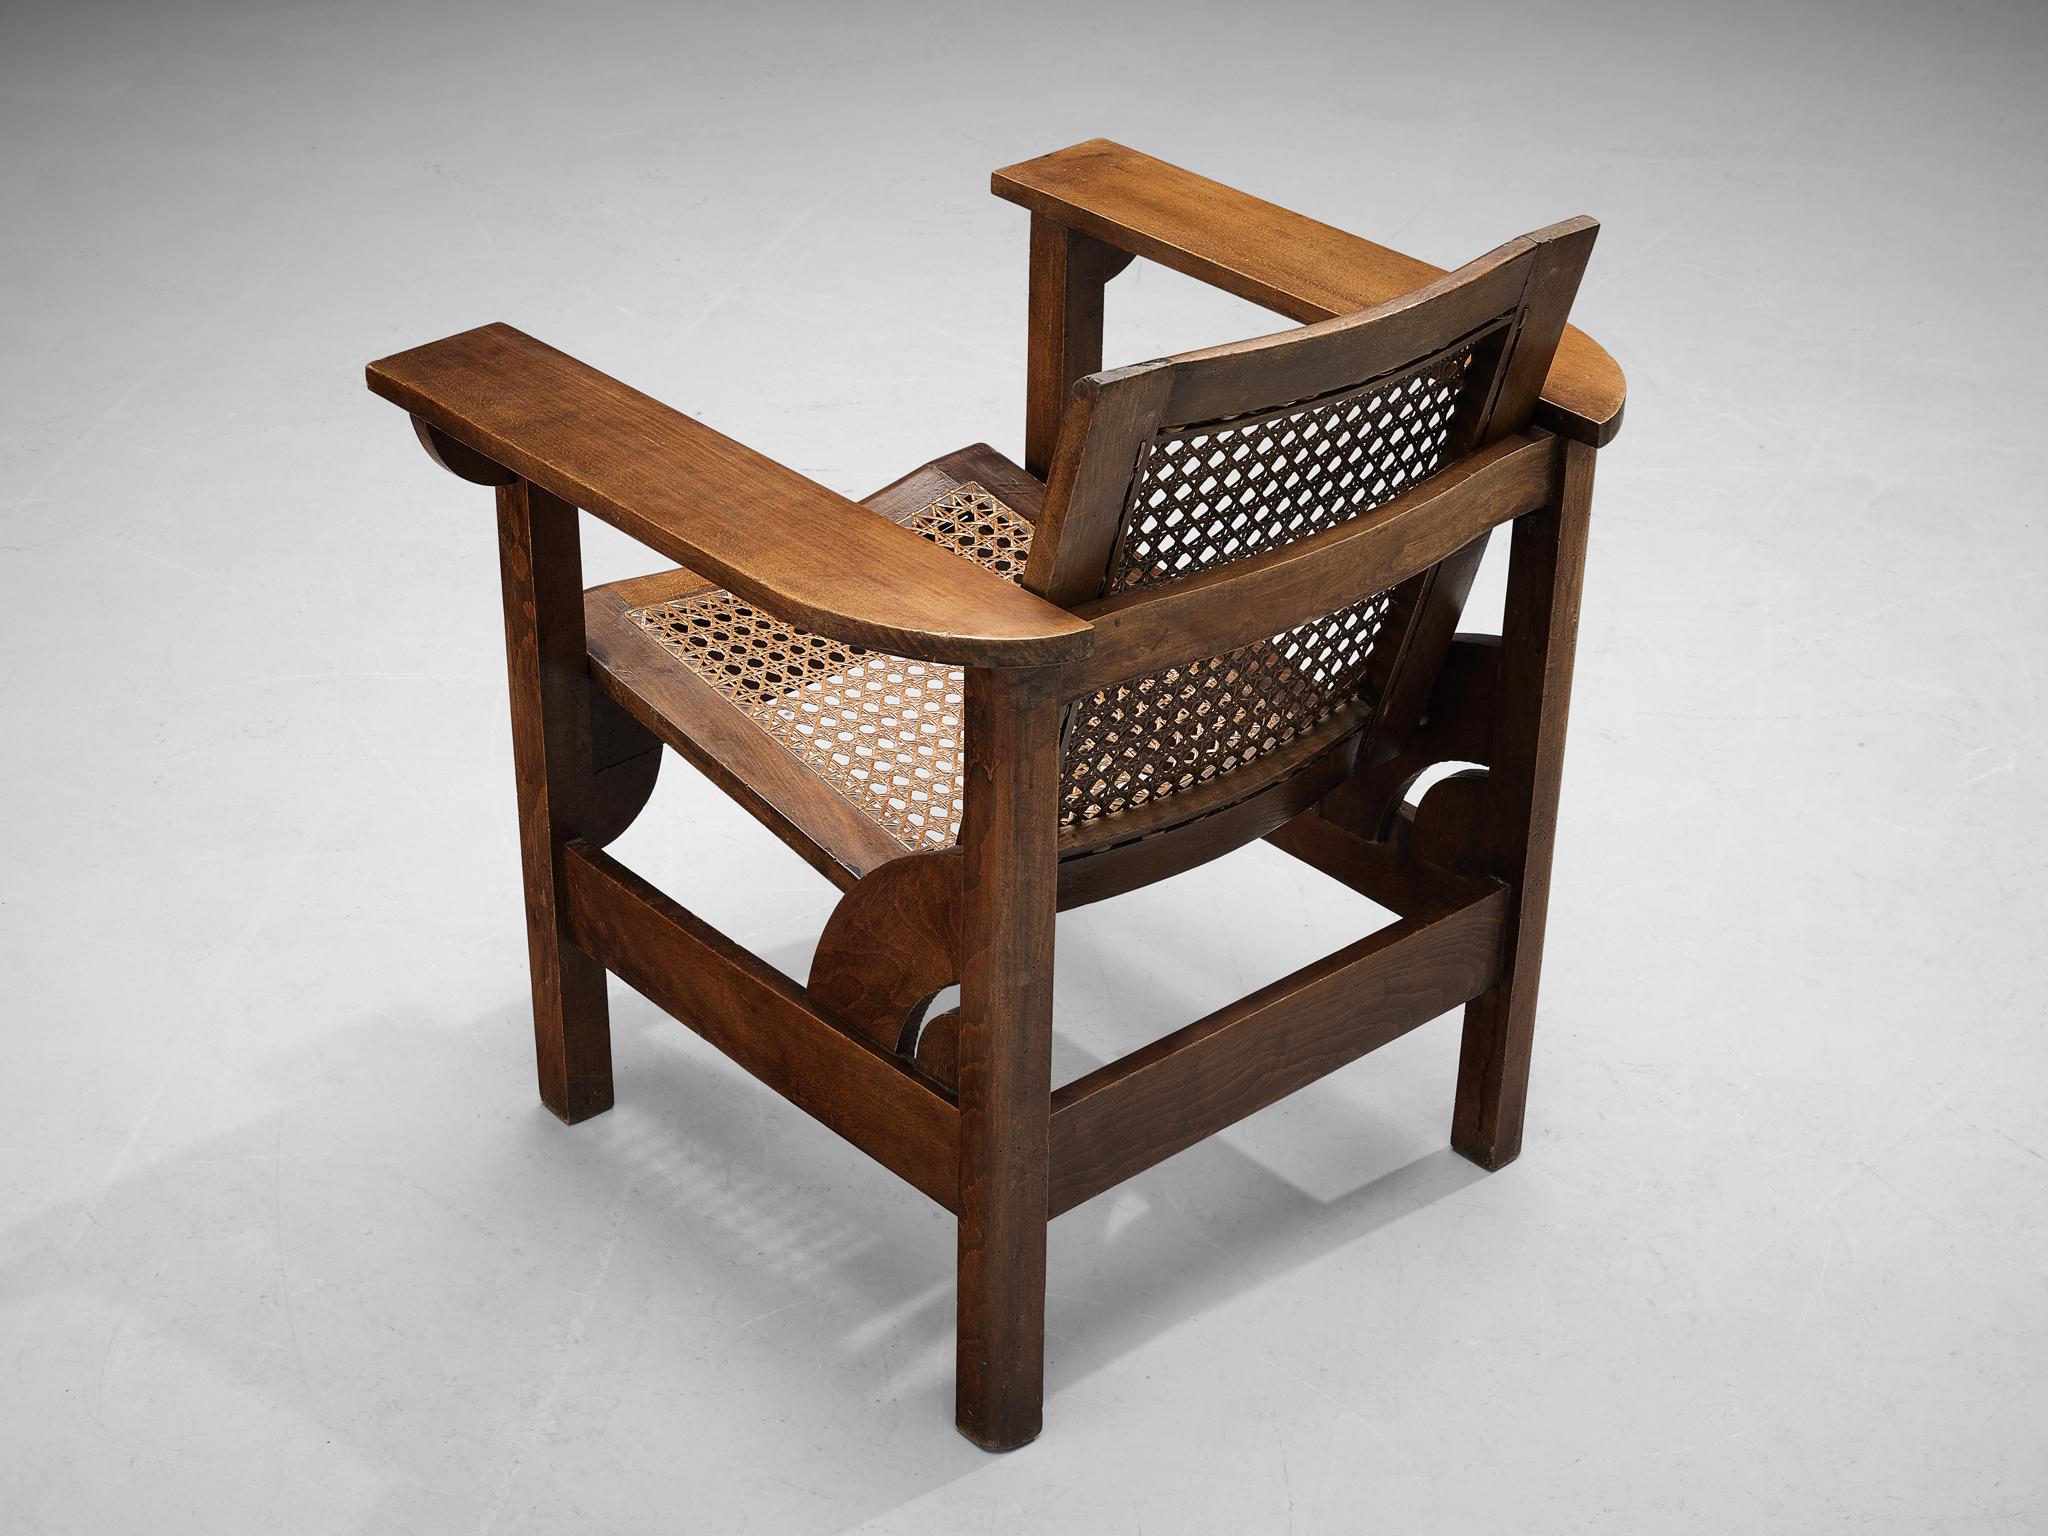 Pierre Dariel 'Hendaye' Armchair in Dark Stained Wood and Cane 3